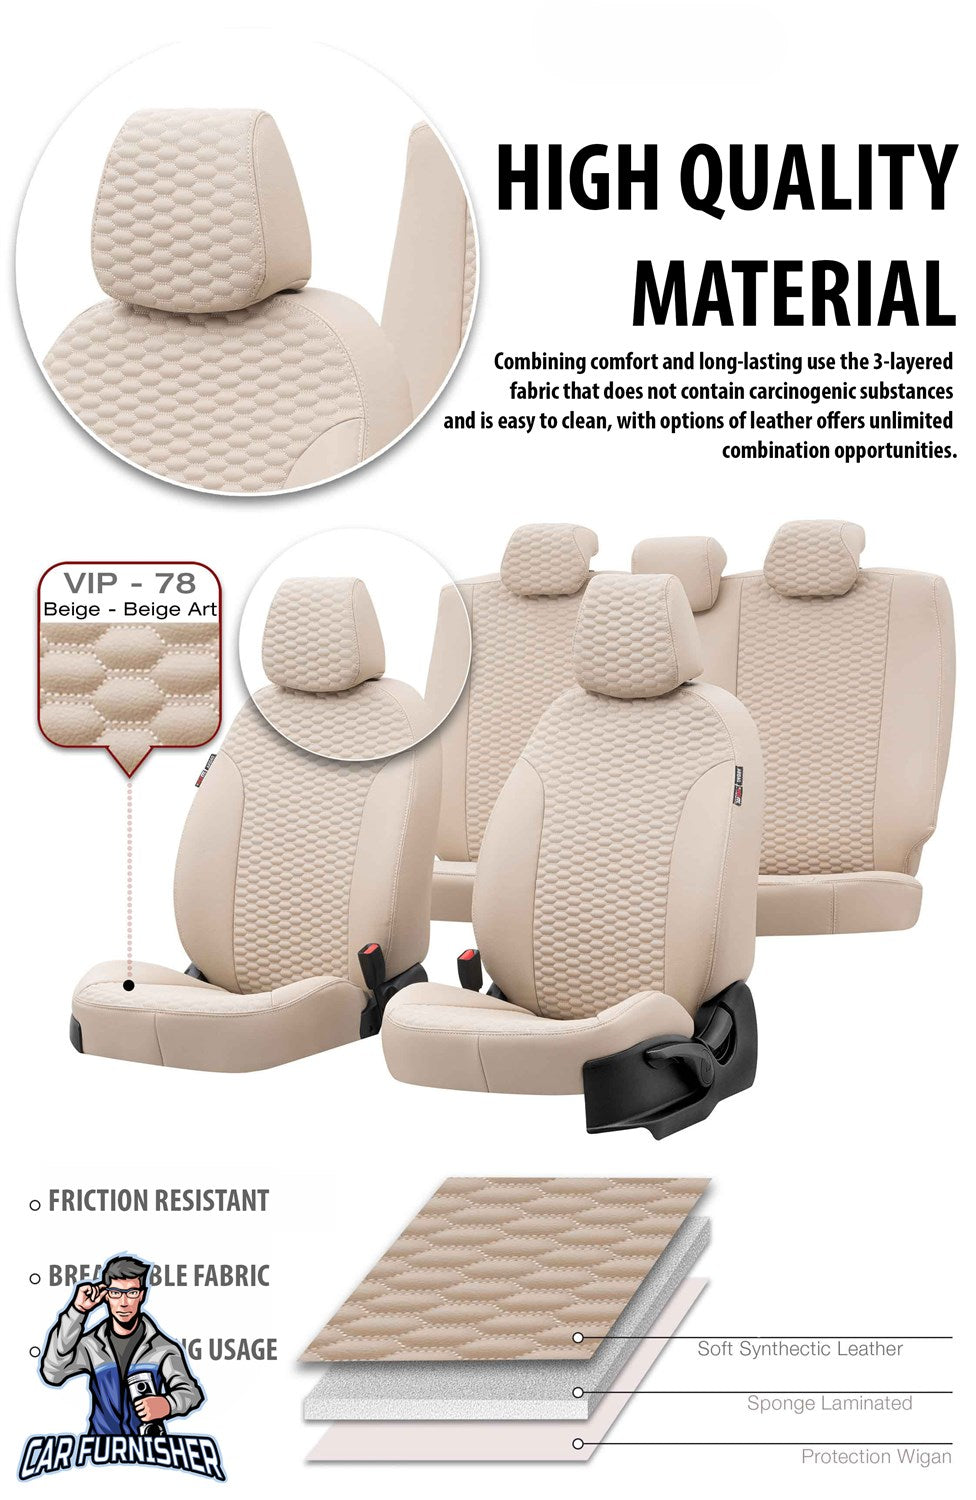 Seat Leon Seat Covers Tokyo Leather Design Ivory Leather